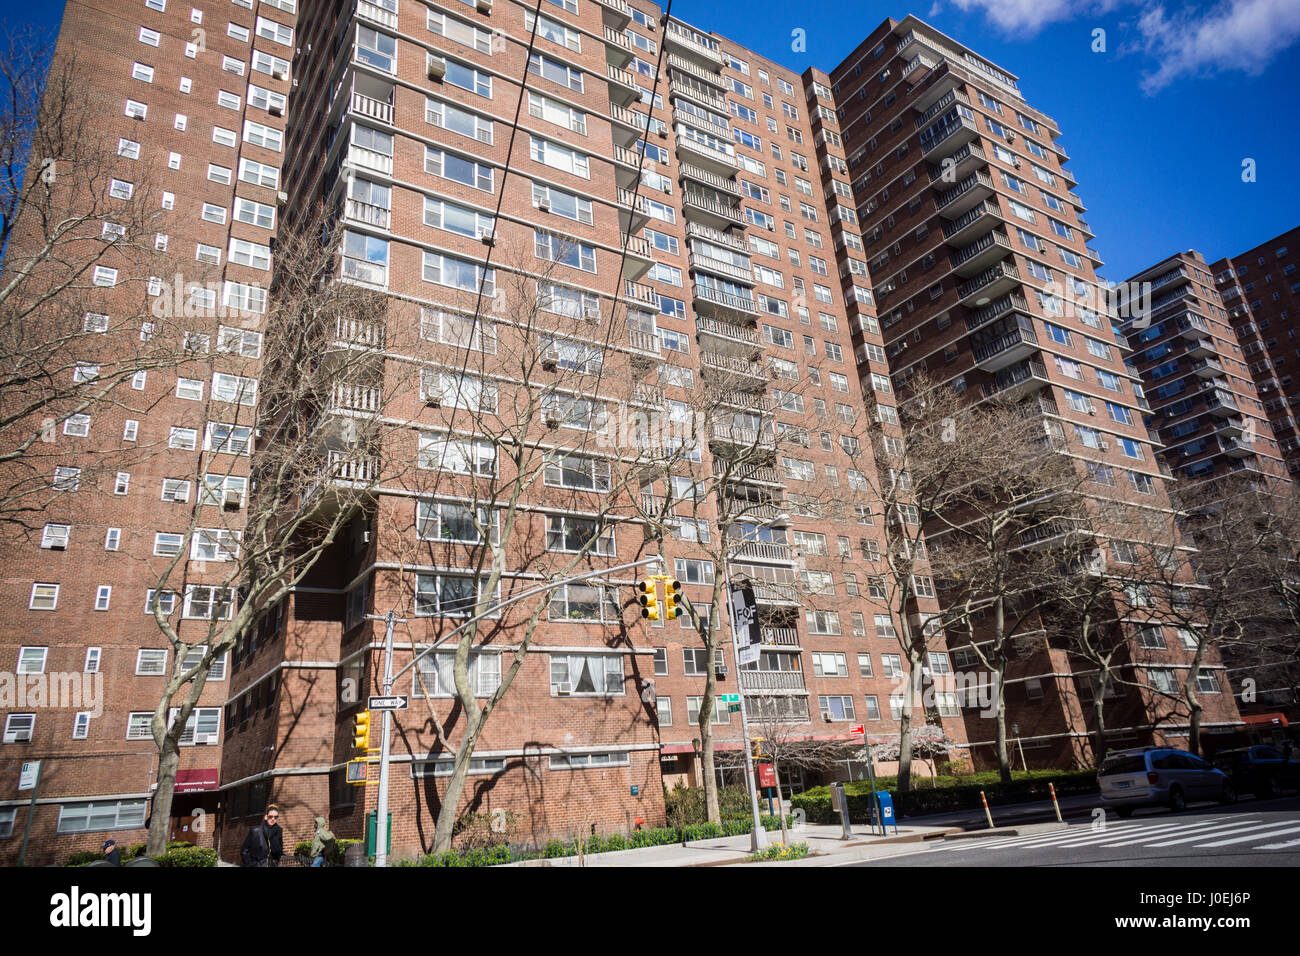 A building in the affordable housing, Soviet-bloc evocative architecture, Penn South complex in New York on Saturday, April 8, 2017. (© Richard B. Levine) Stock Photo